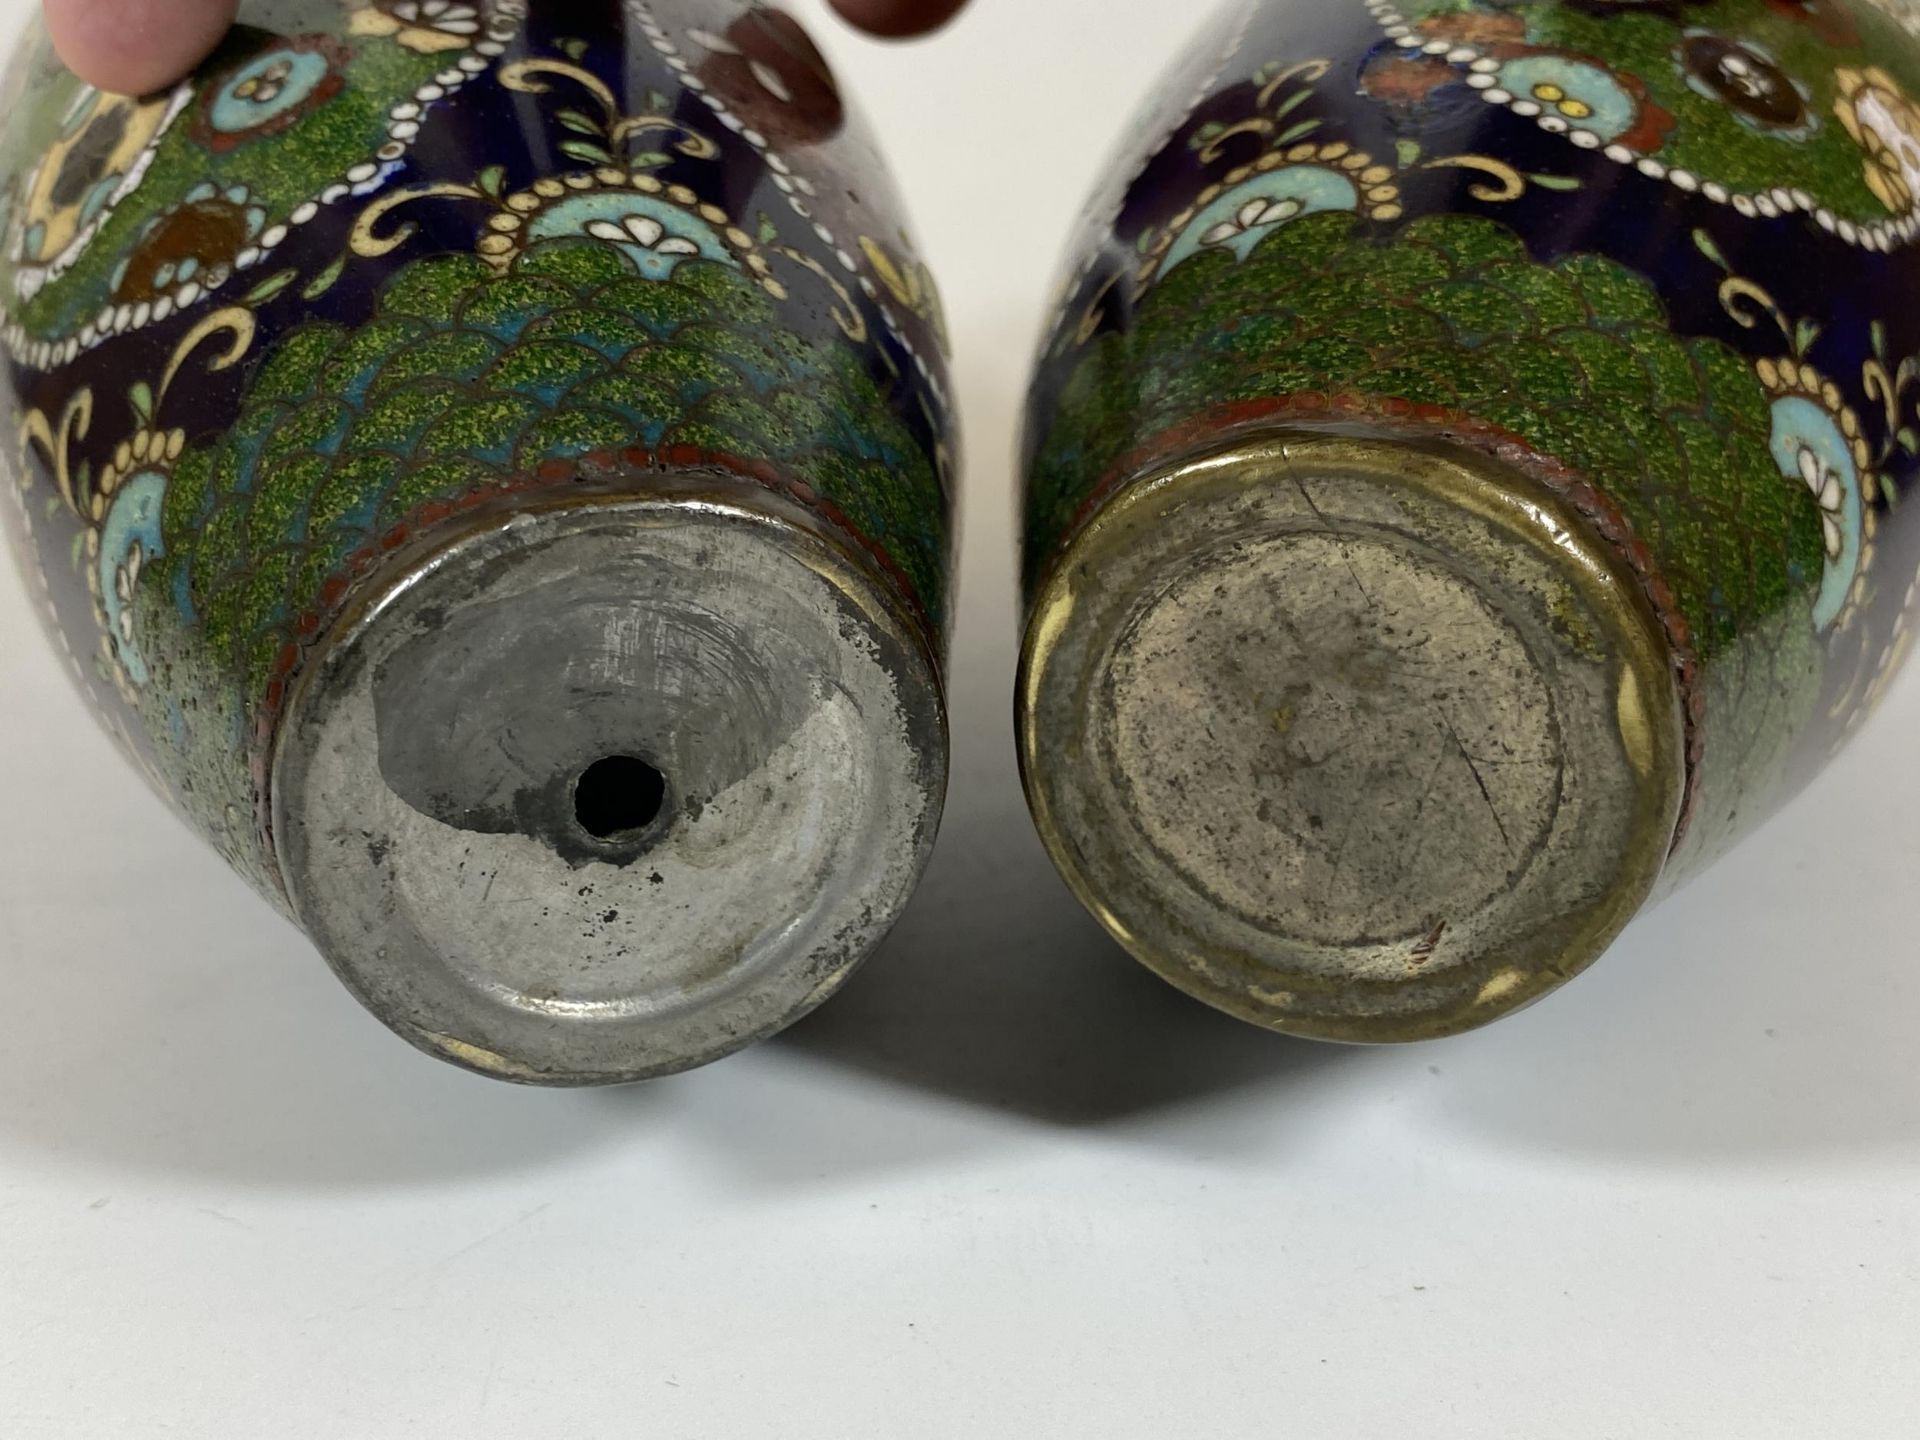 A PAIR OF JAPANESE MEIJI PERIOD (1868-1912) BUTTERFLY DESIGN CLOISONNE VASES, HEIGHT 19CM - Image 3 of 4